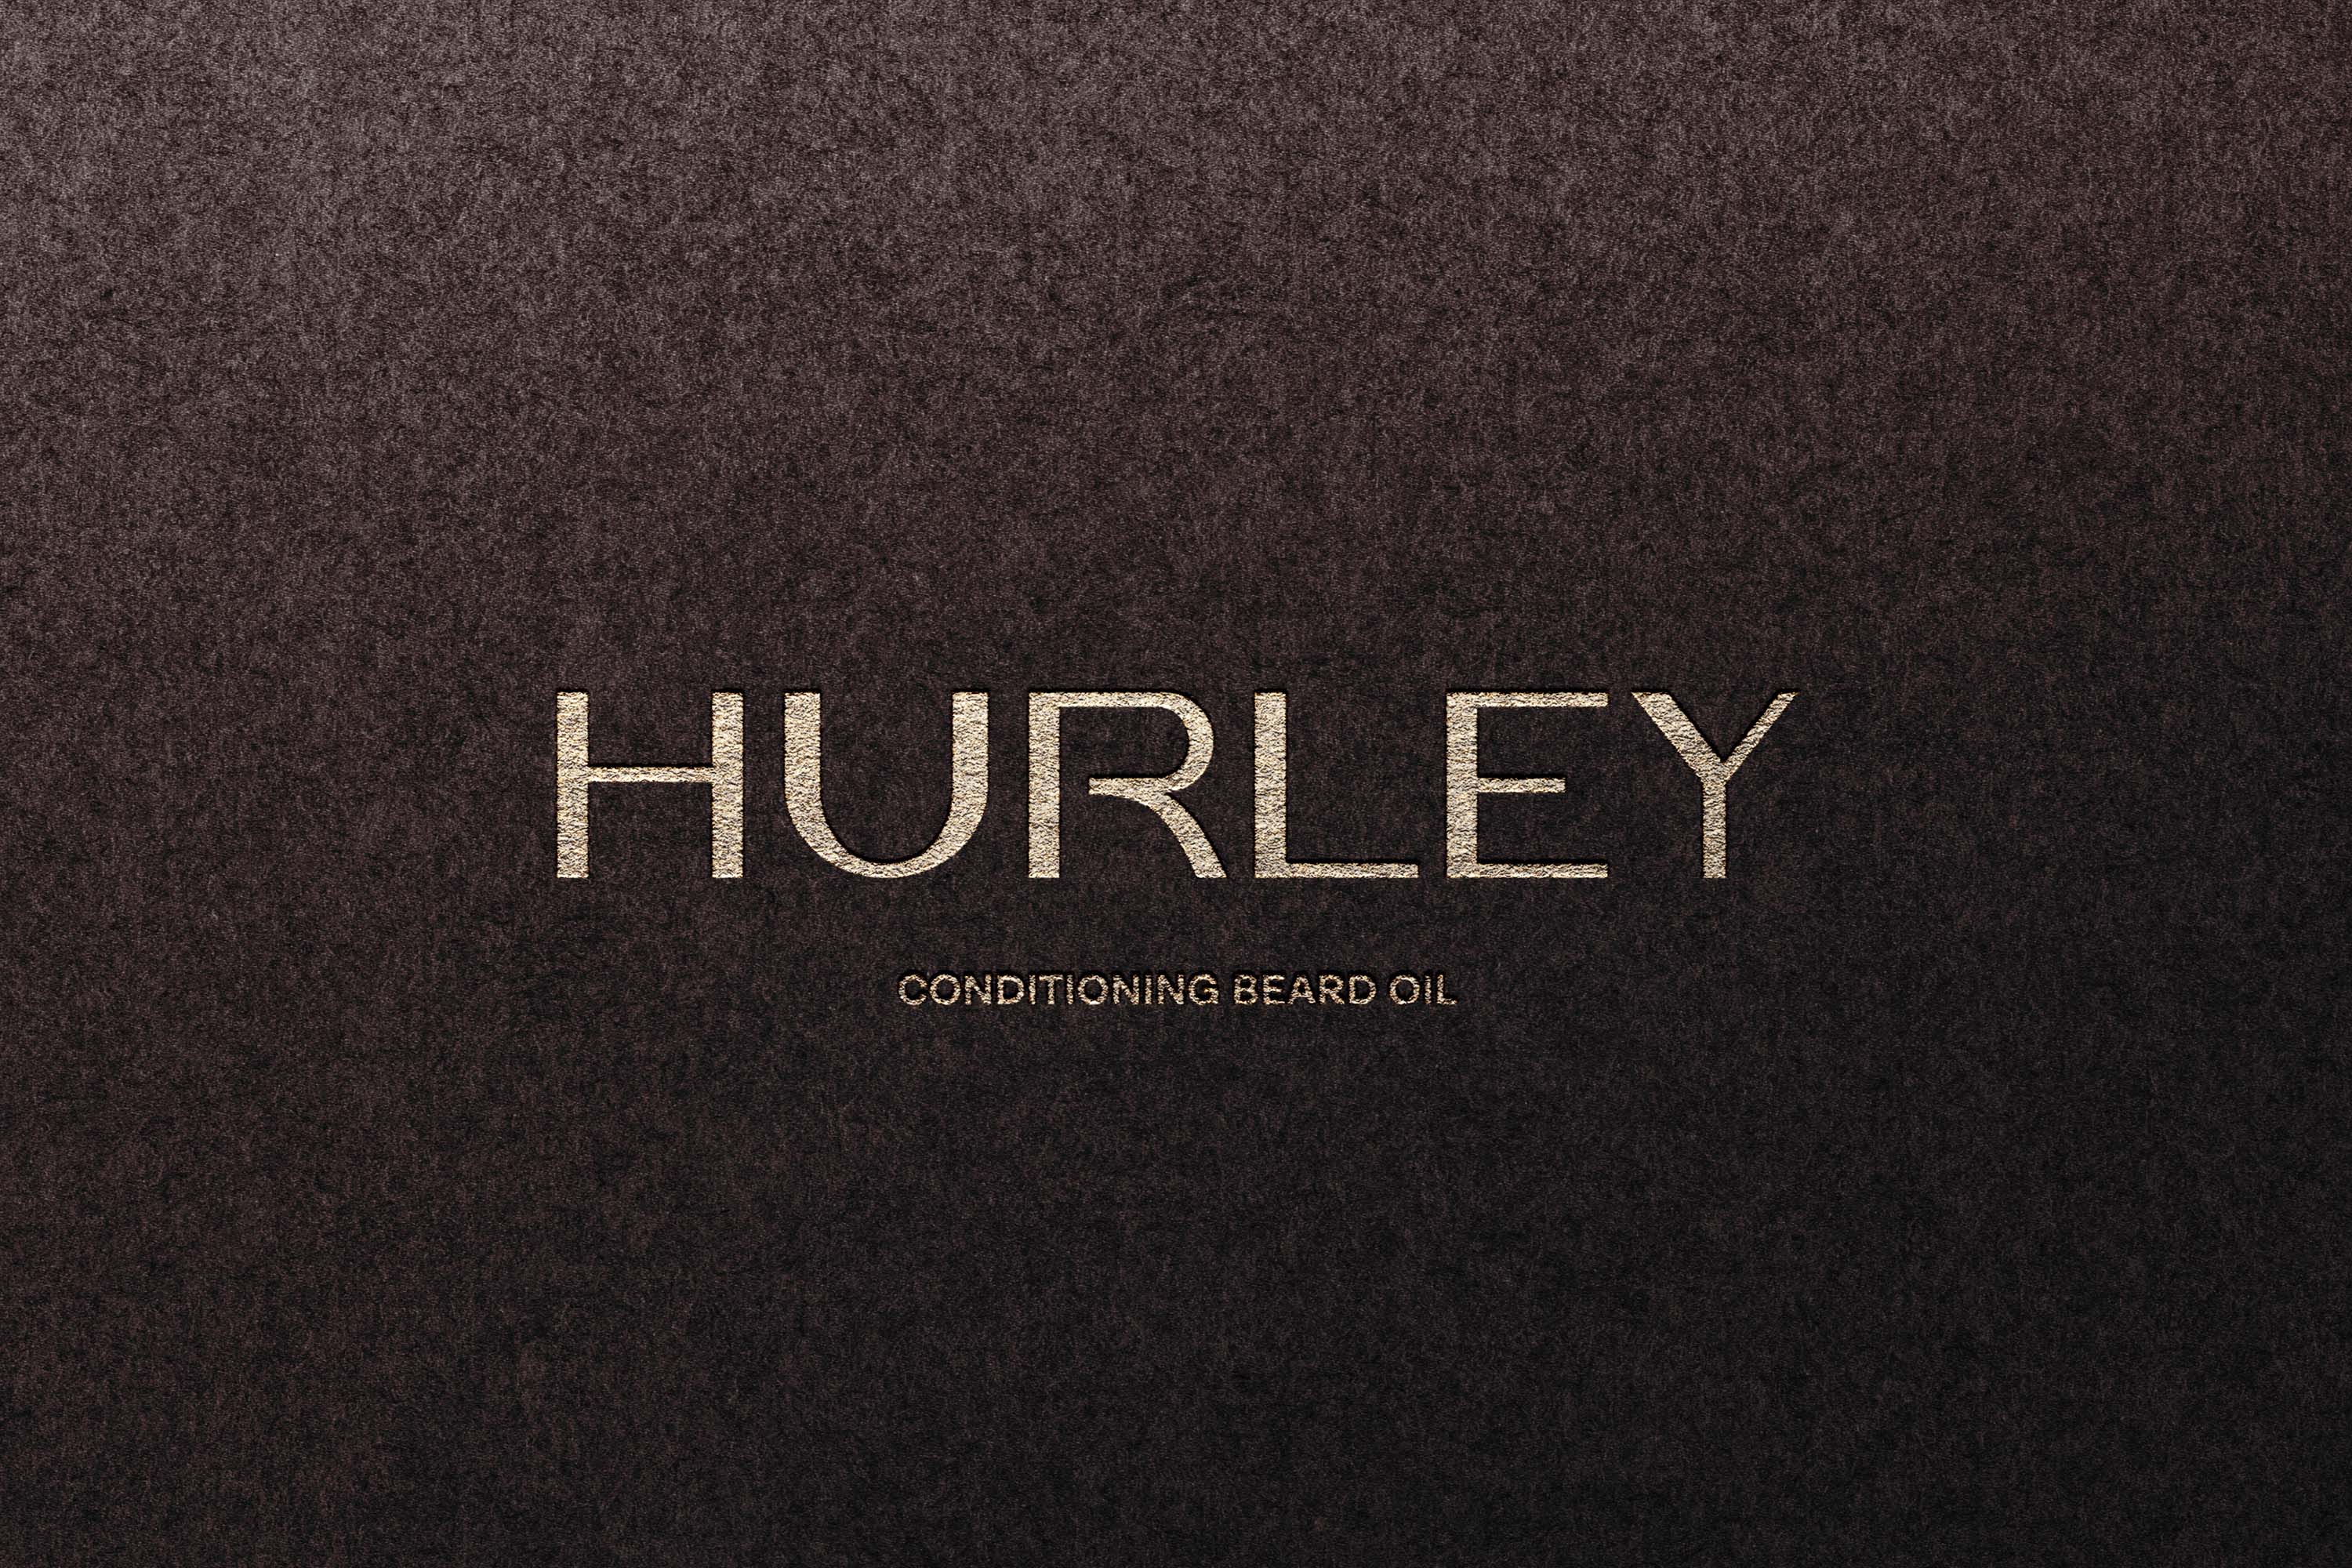 Hurley Beard Oil Brand Identity and Packaging Design by Widarto